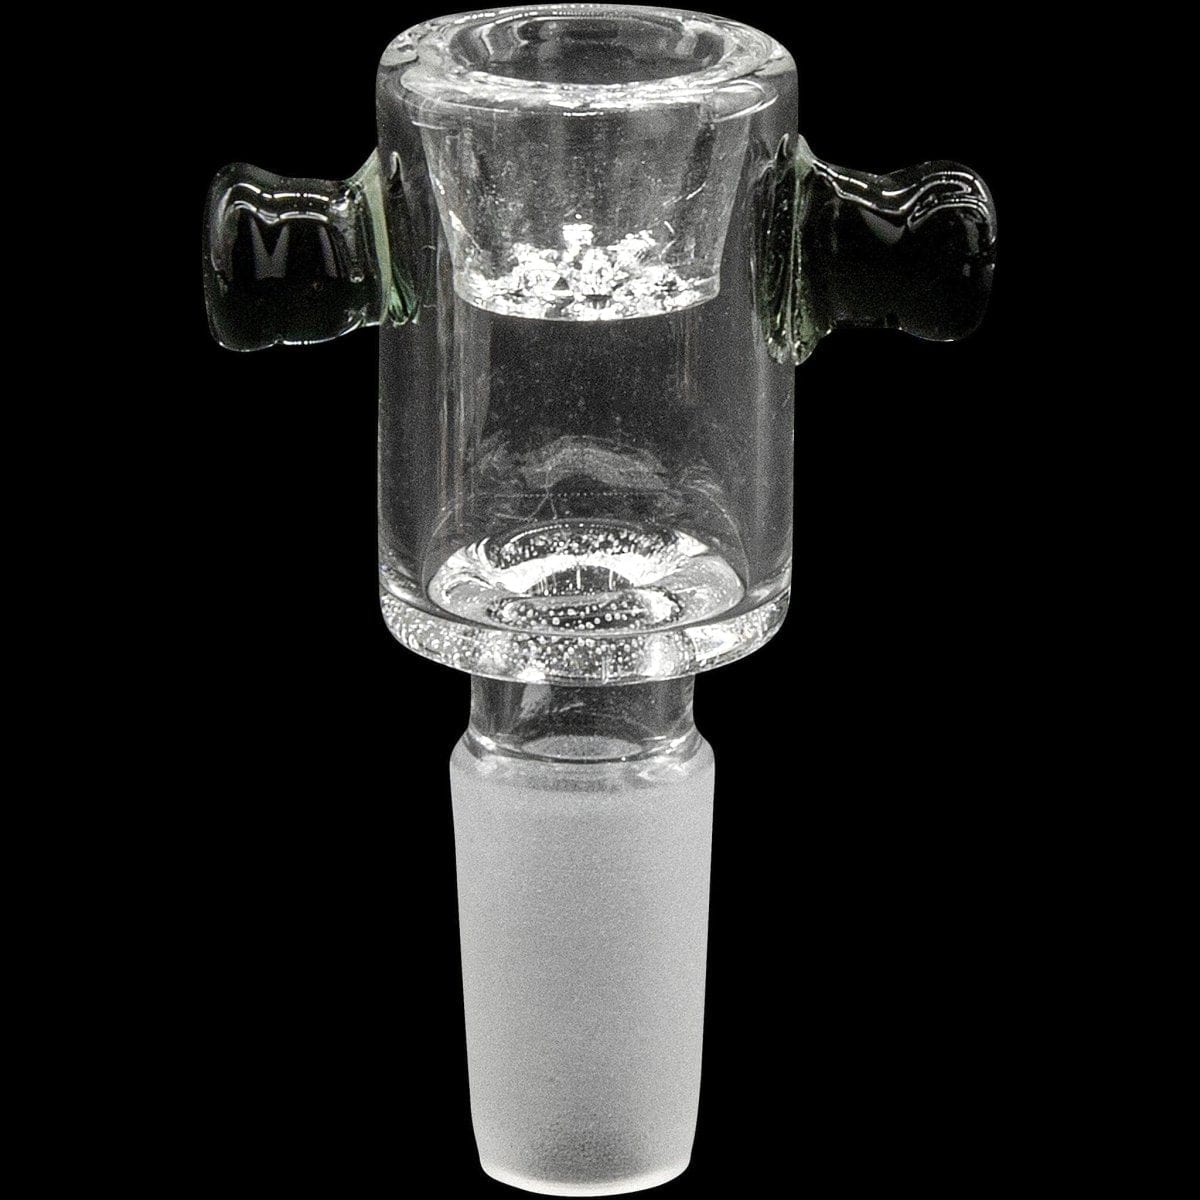 Rupert's Drop Smoking Accessory BLACK Honeycomb Cylinder Bowl with Handles